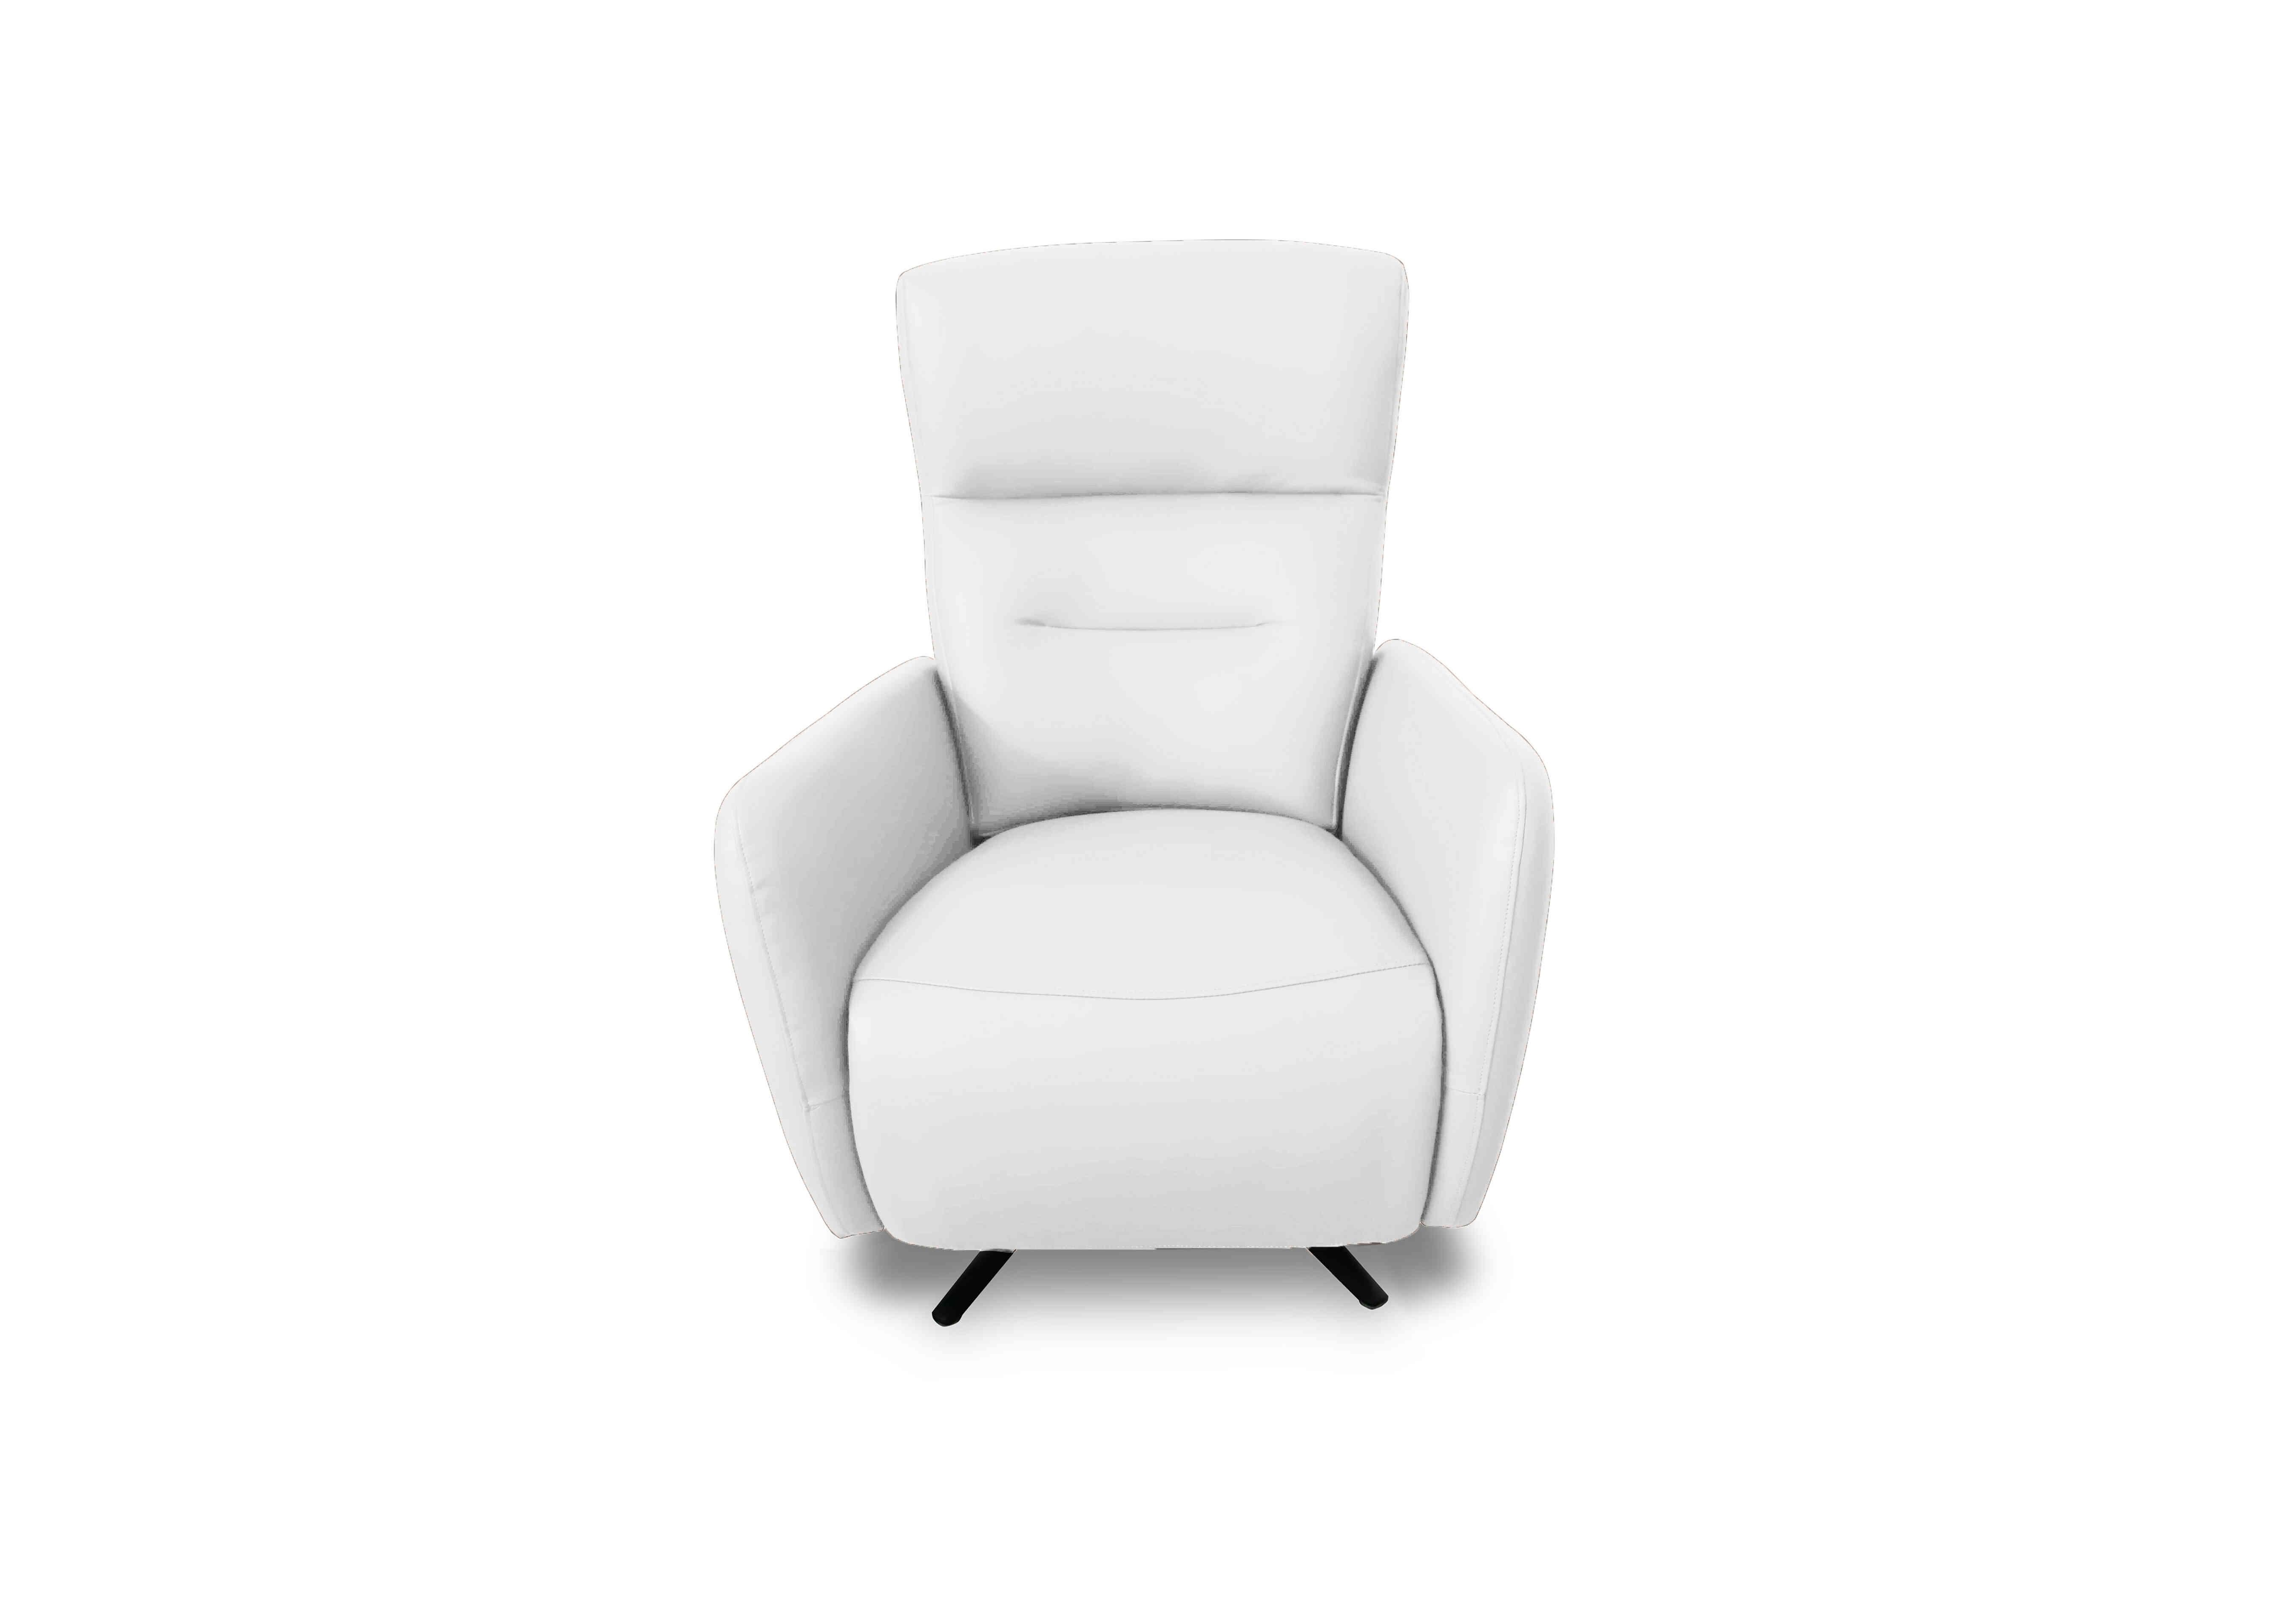 Designer Chair Collection Le Mans Leather Dual Power Recliner Swivel Chair in Nc-744d Star White on Furniture Village